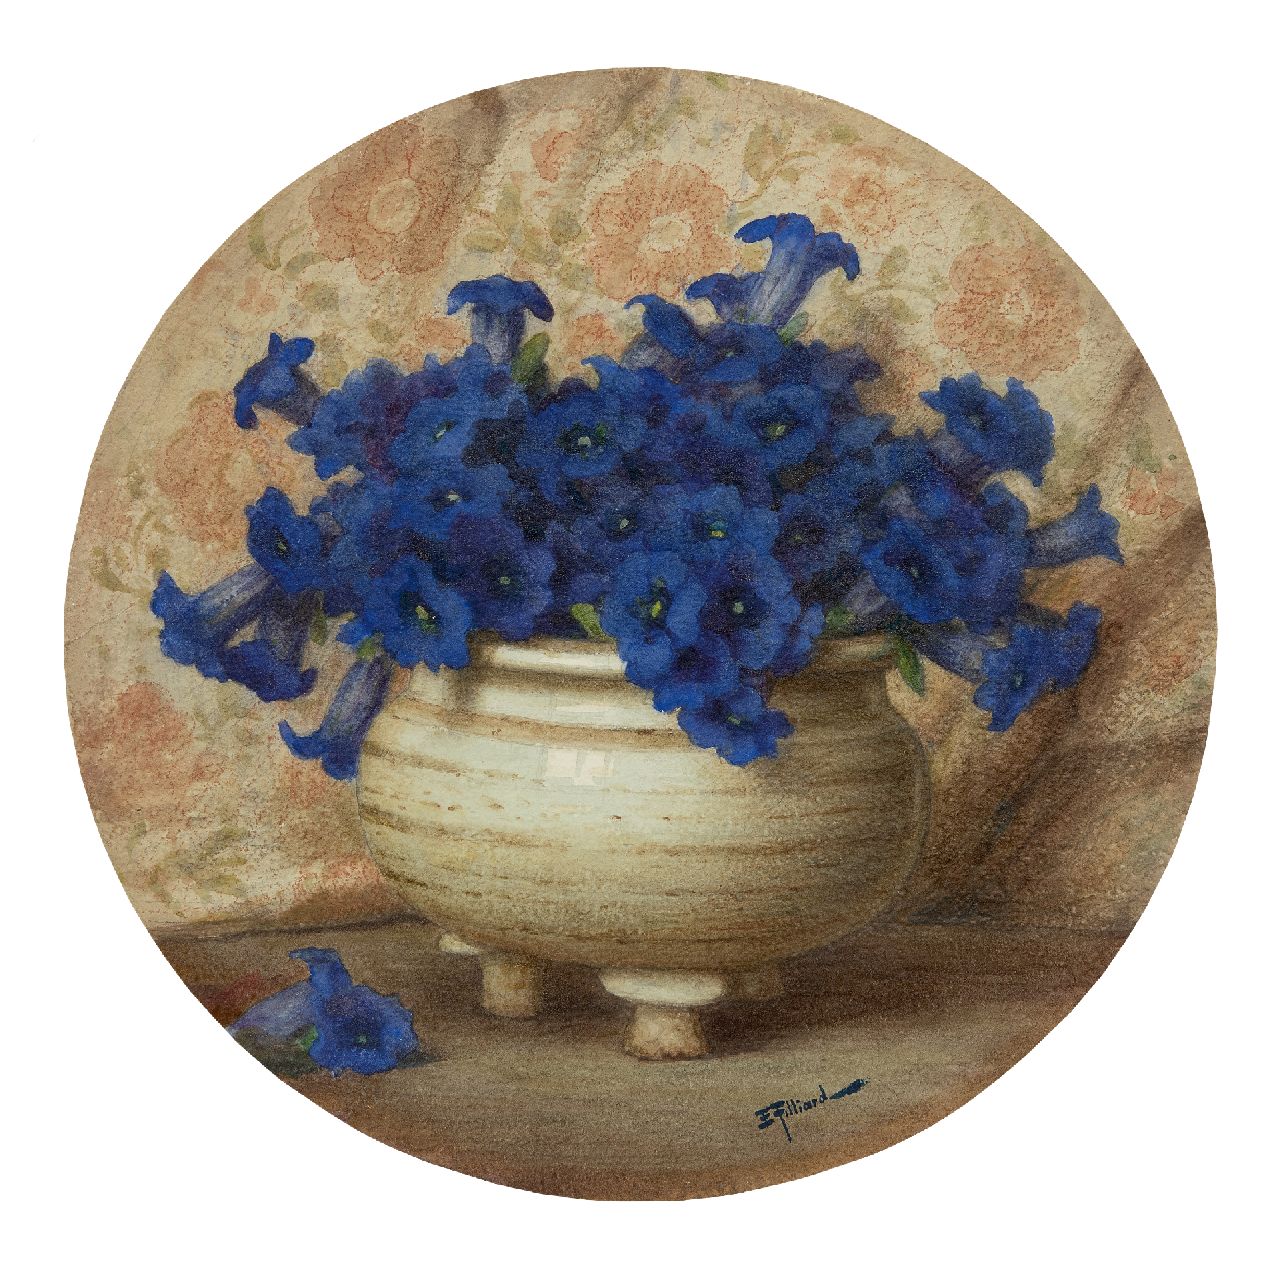 Filliard E.  | Ernest Filliard | Watercolours and drawings offered for sale | Purple flowers in earthenware pot, watercolour on paper, signed l.r.